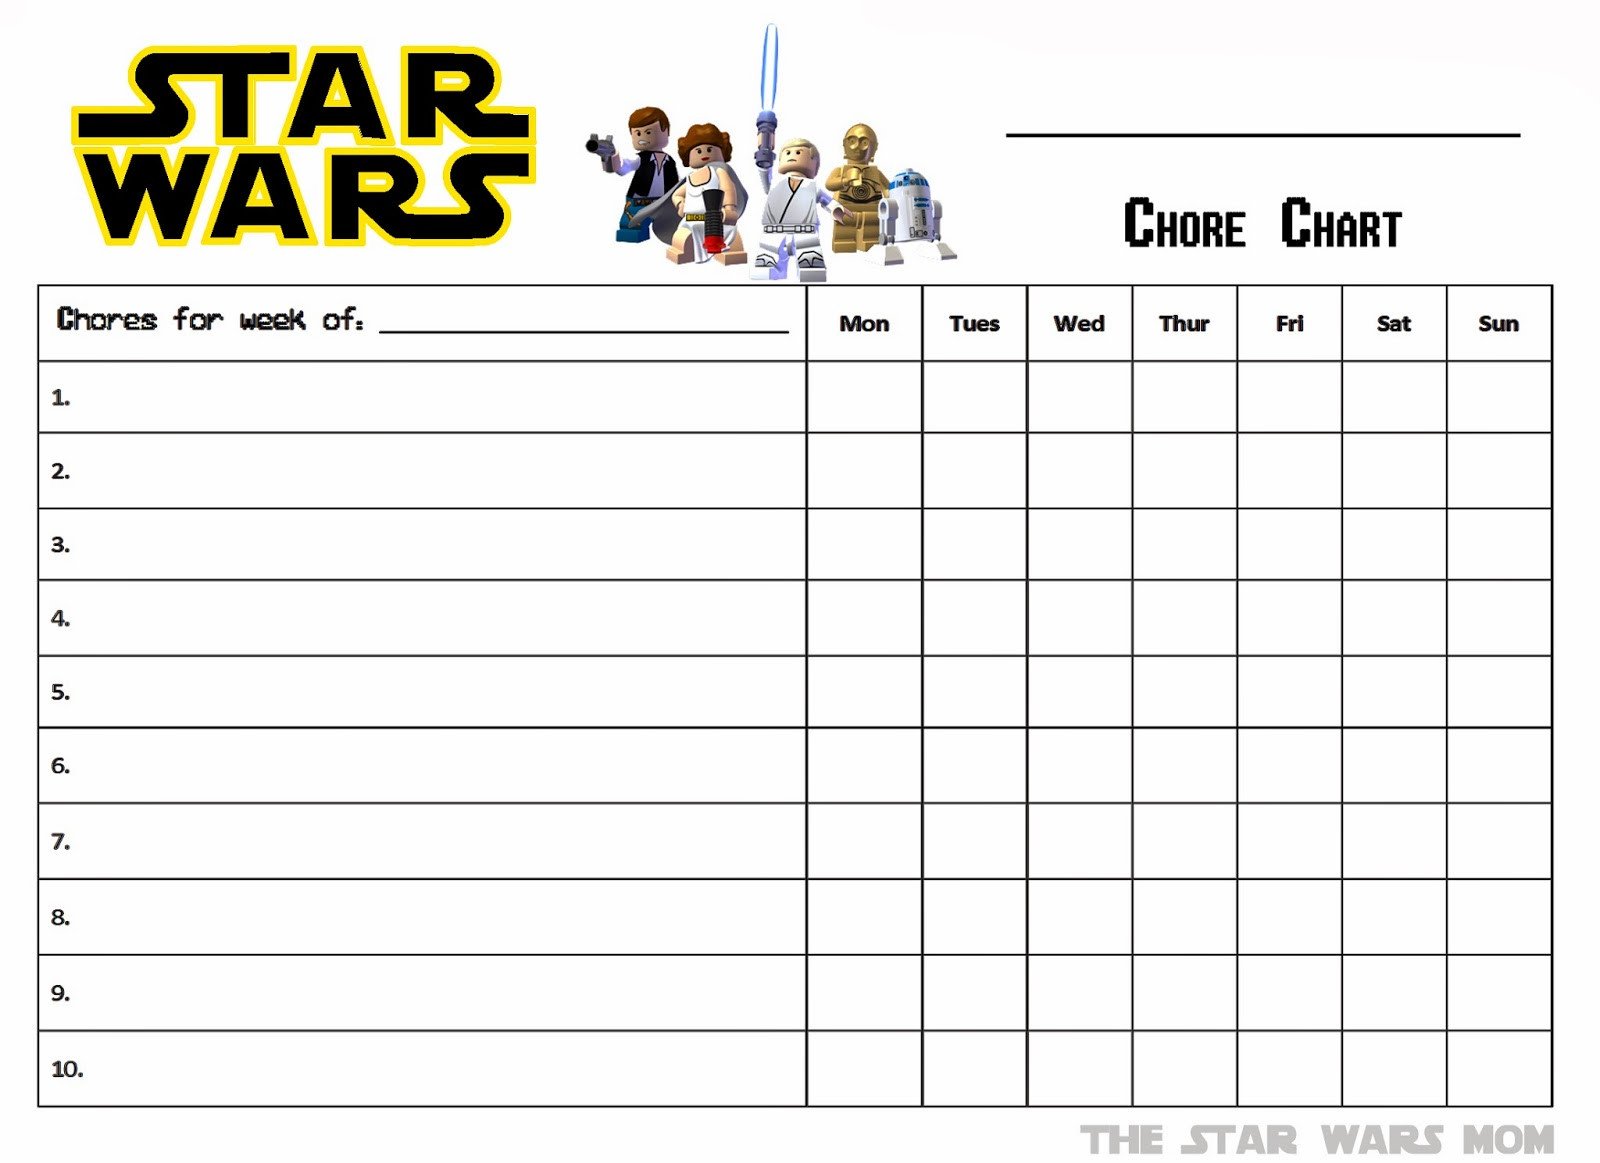 Lego Star Wars Free Printable Chores Chart The Star